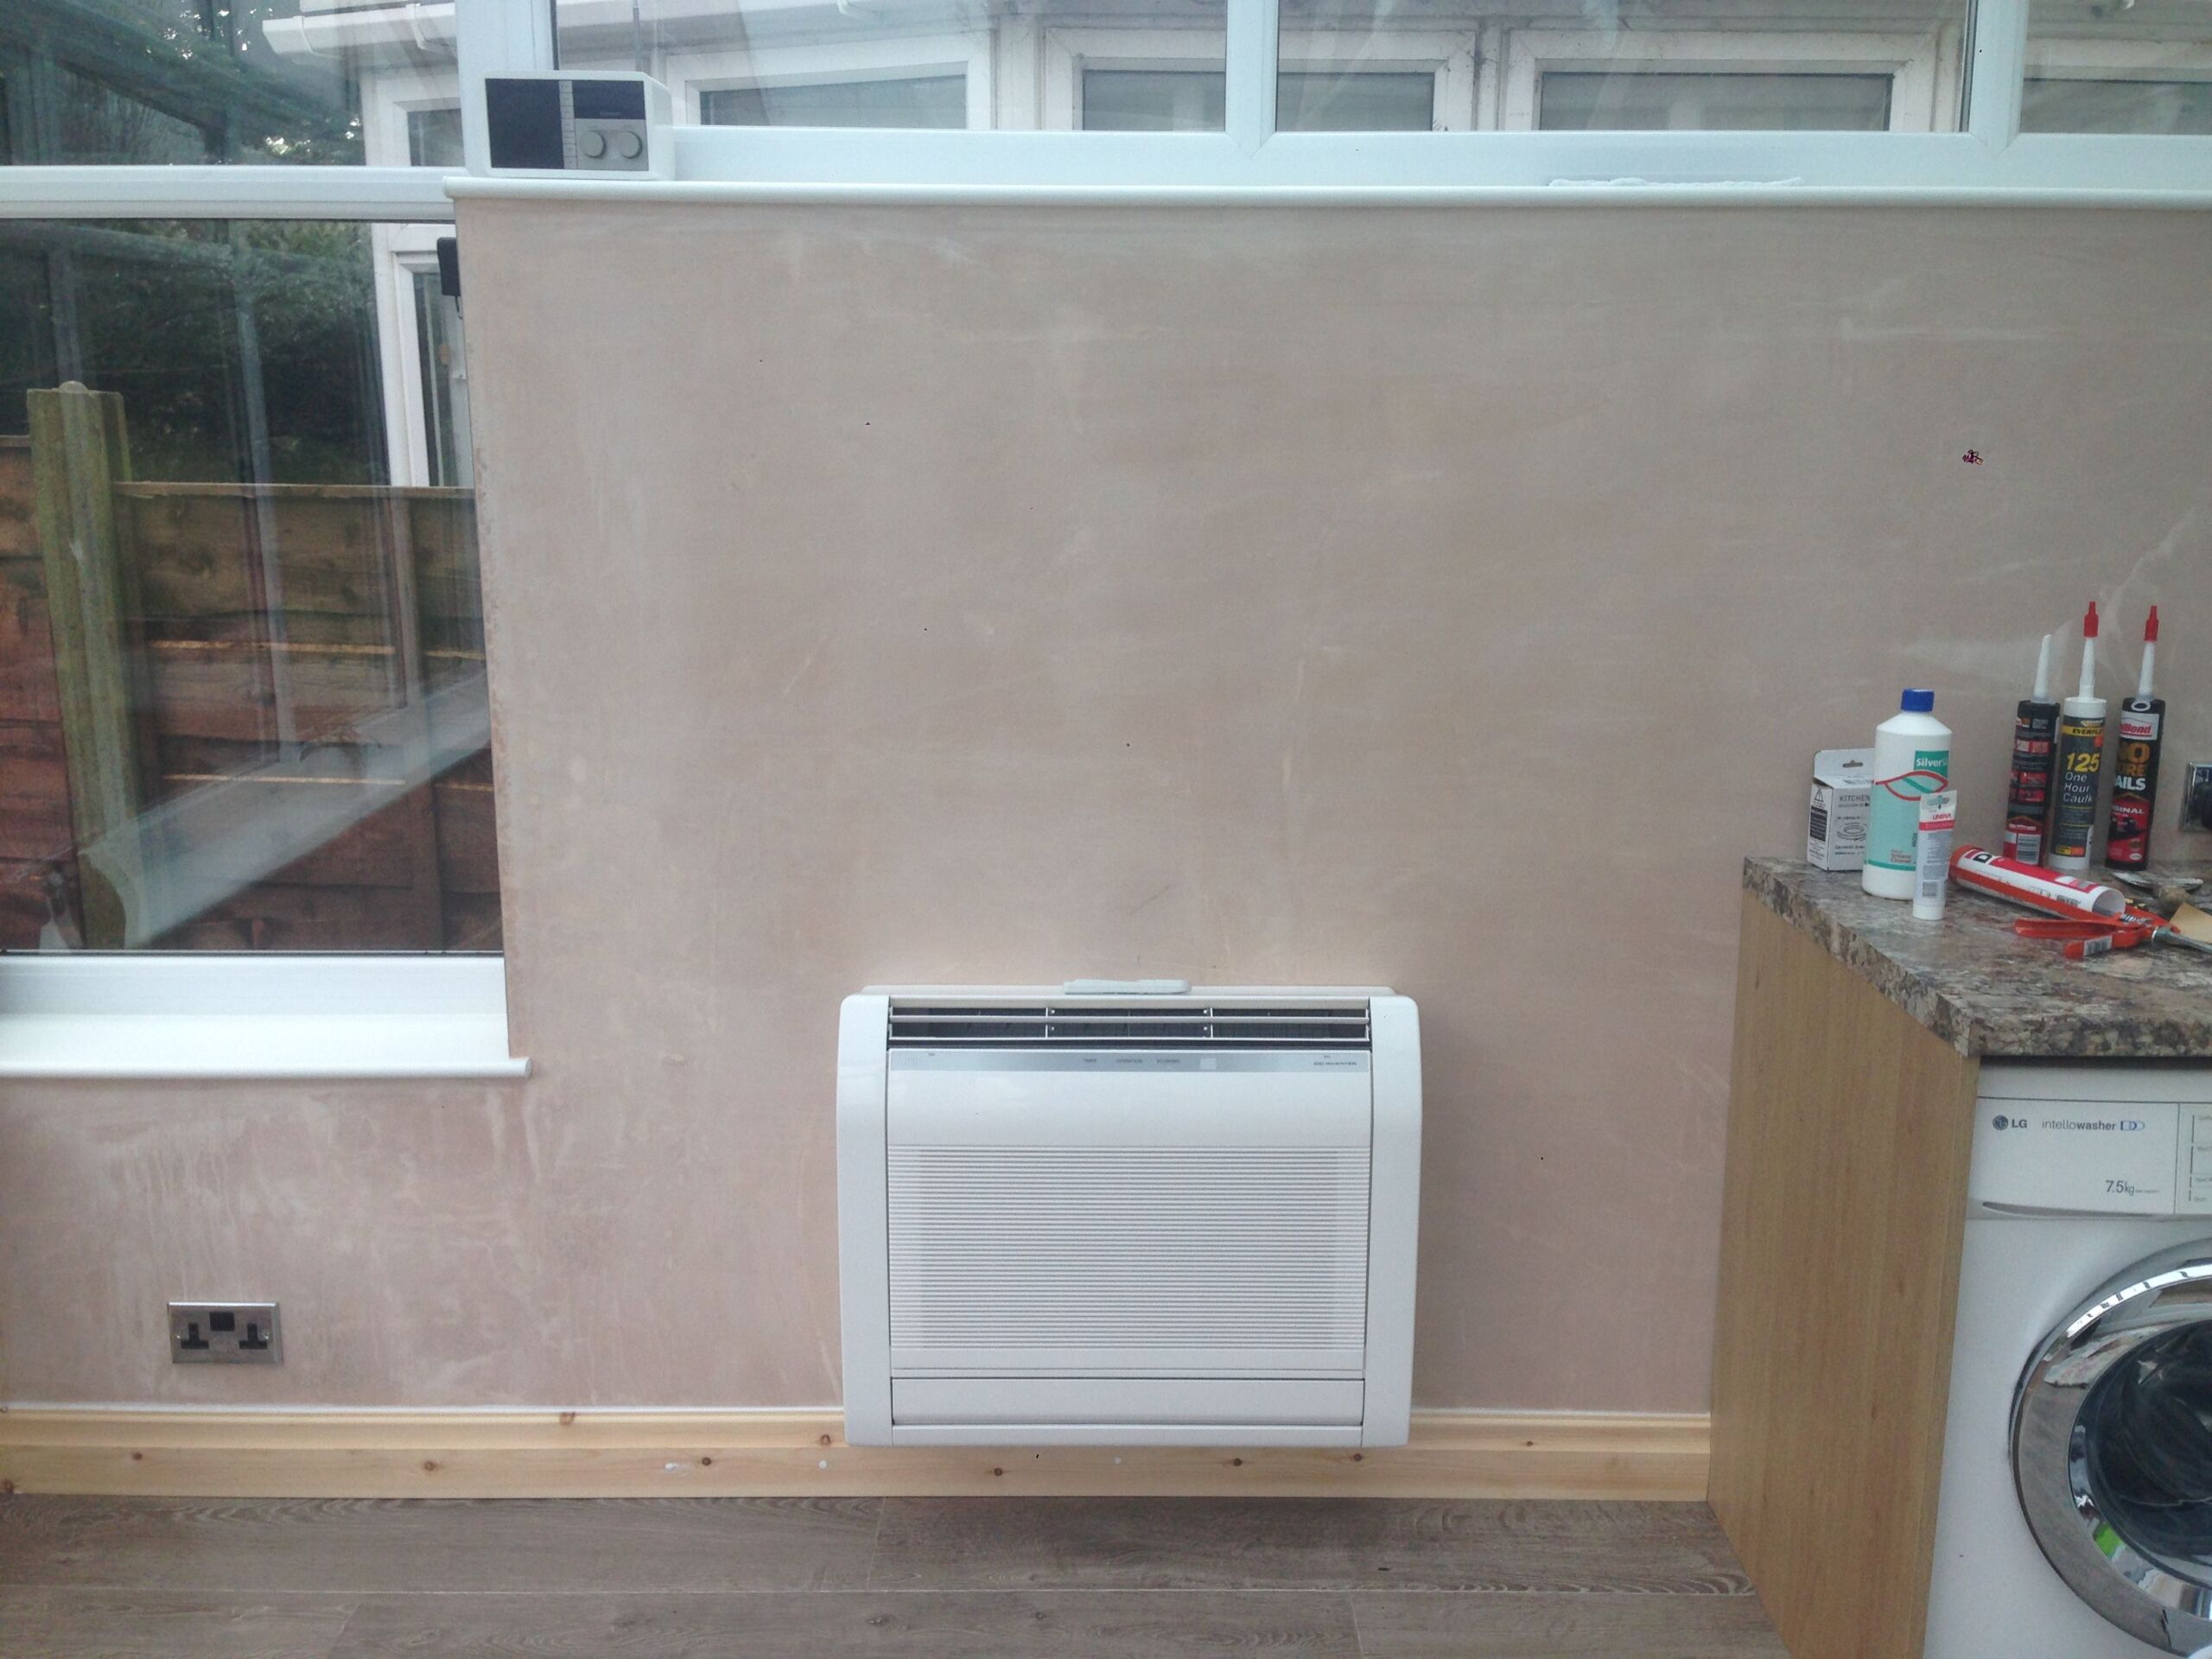 Air conditioning unit installed on a wall